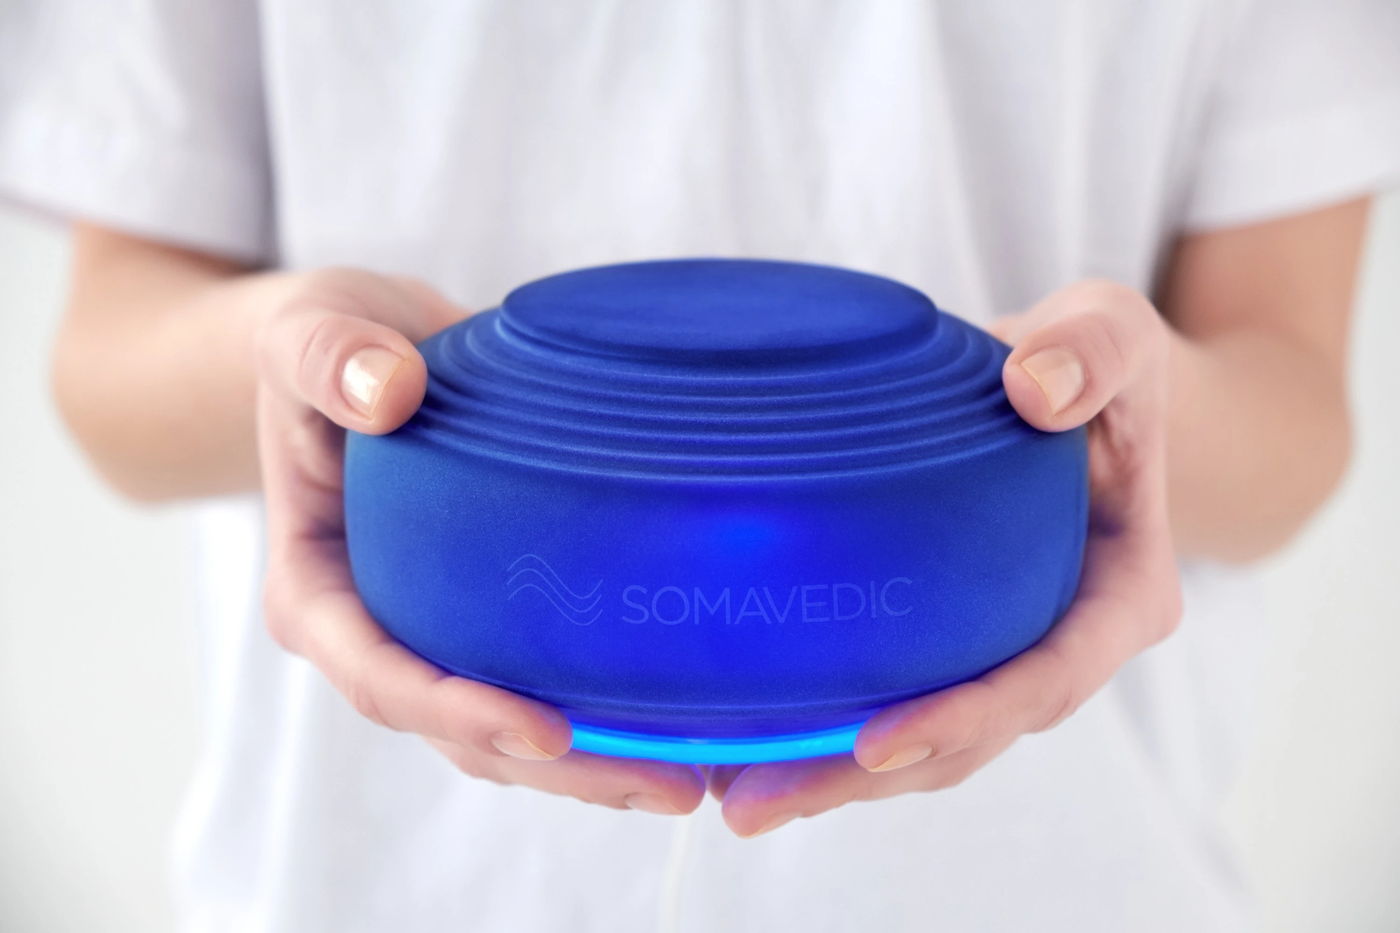 "Medic Cobalt" Supports Psyche & Nervous System, Protection From 3G, 4G For Whole House, by Somavedic